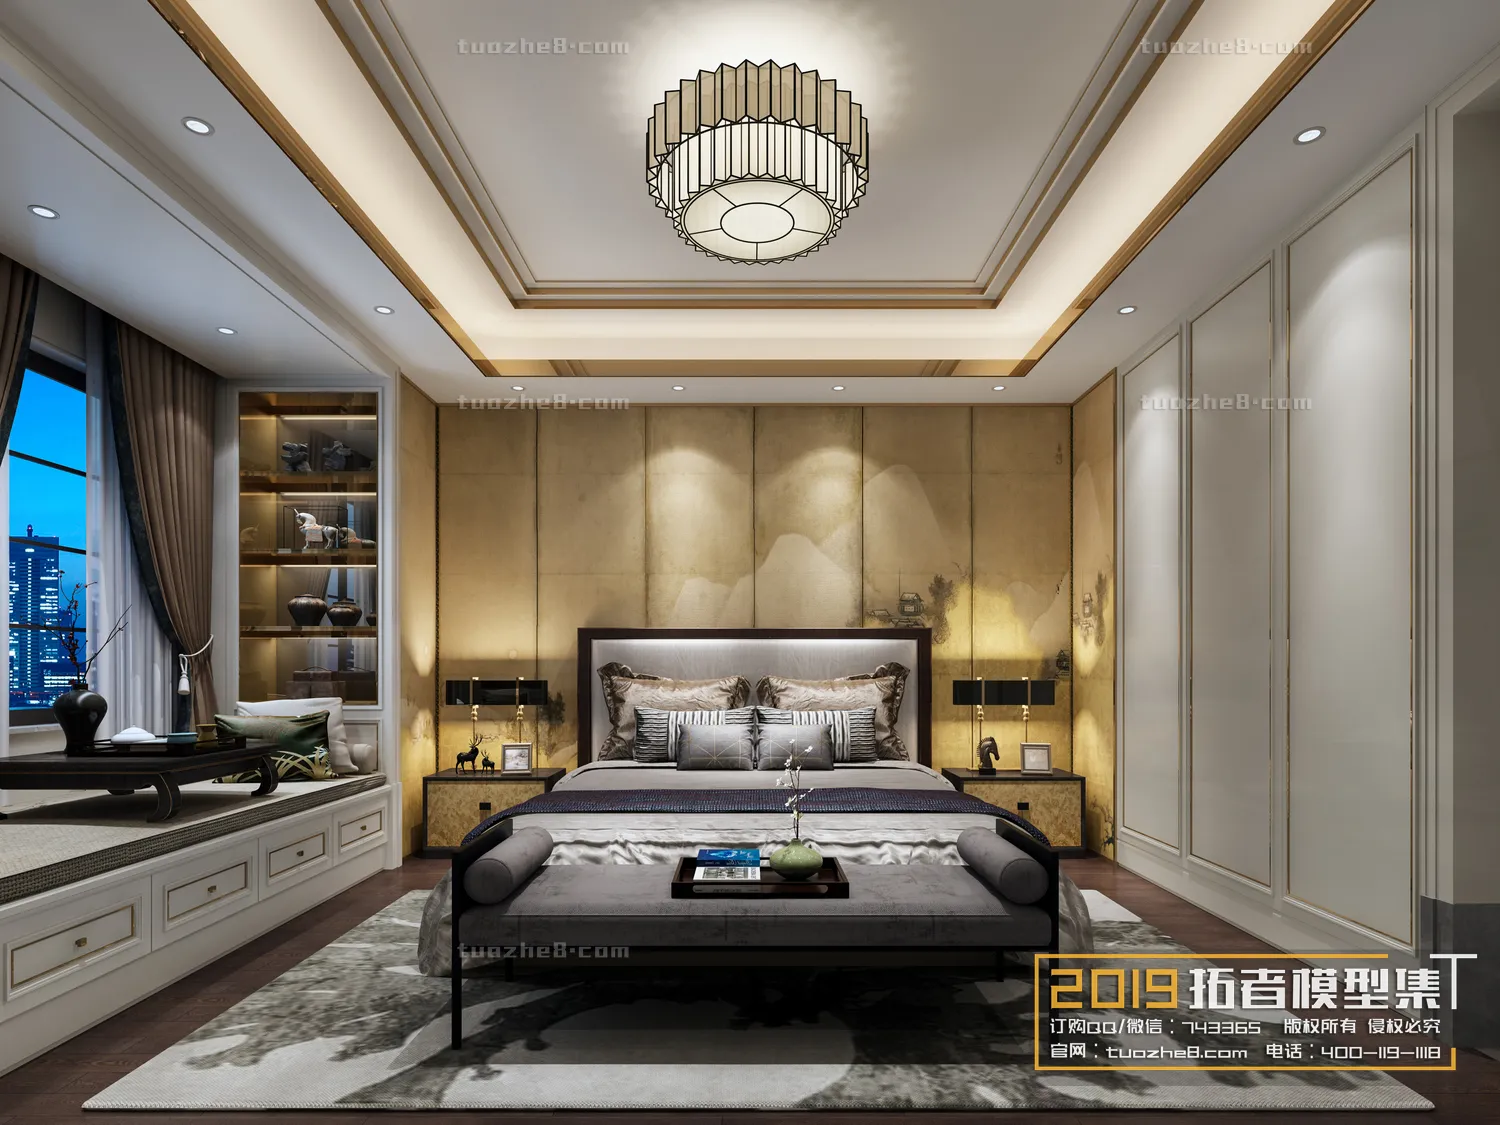 Extension Interior – BEDROOM – CHINESE STYLES – 077